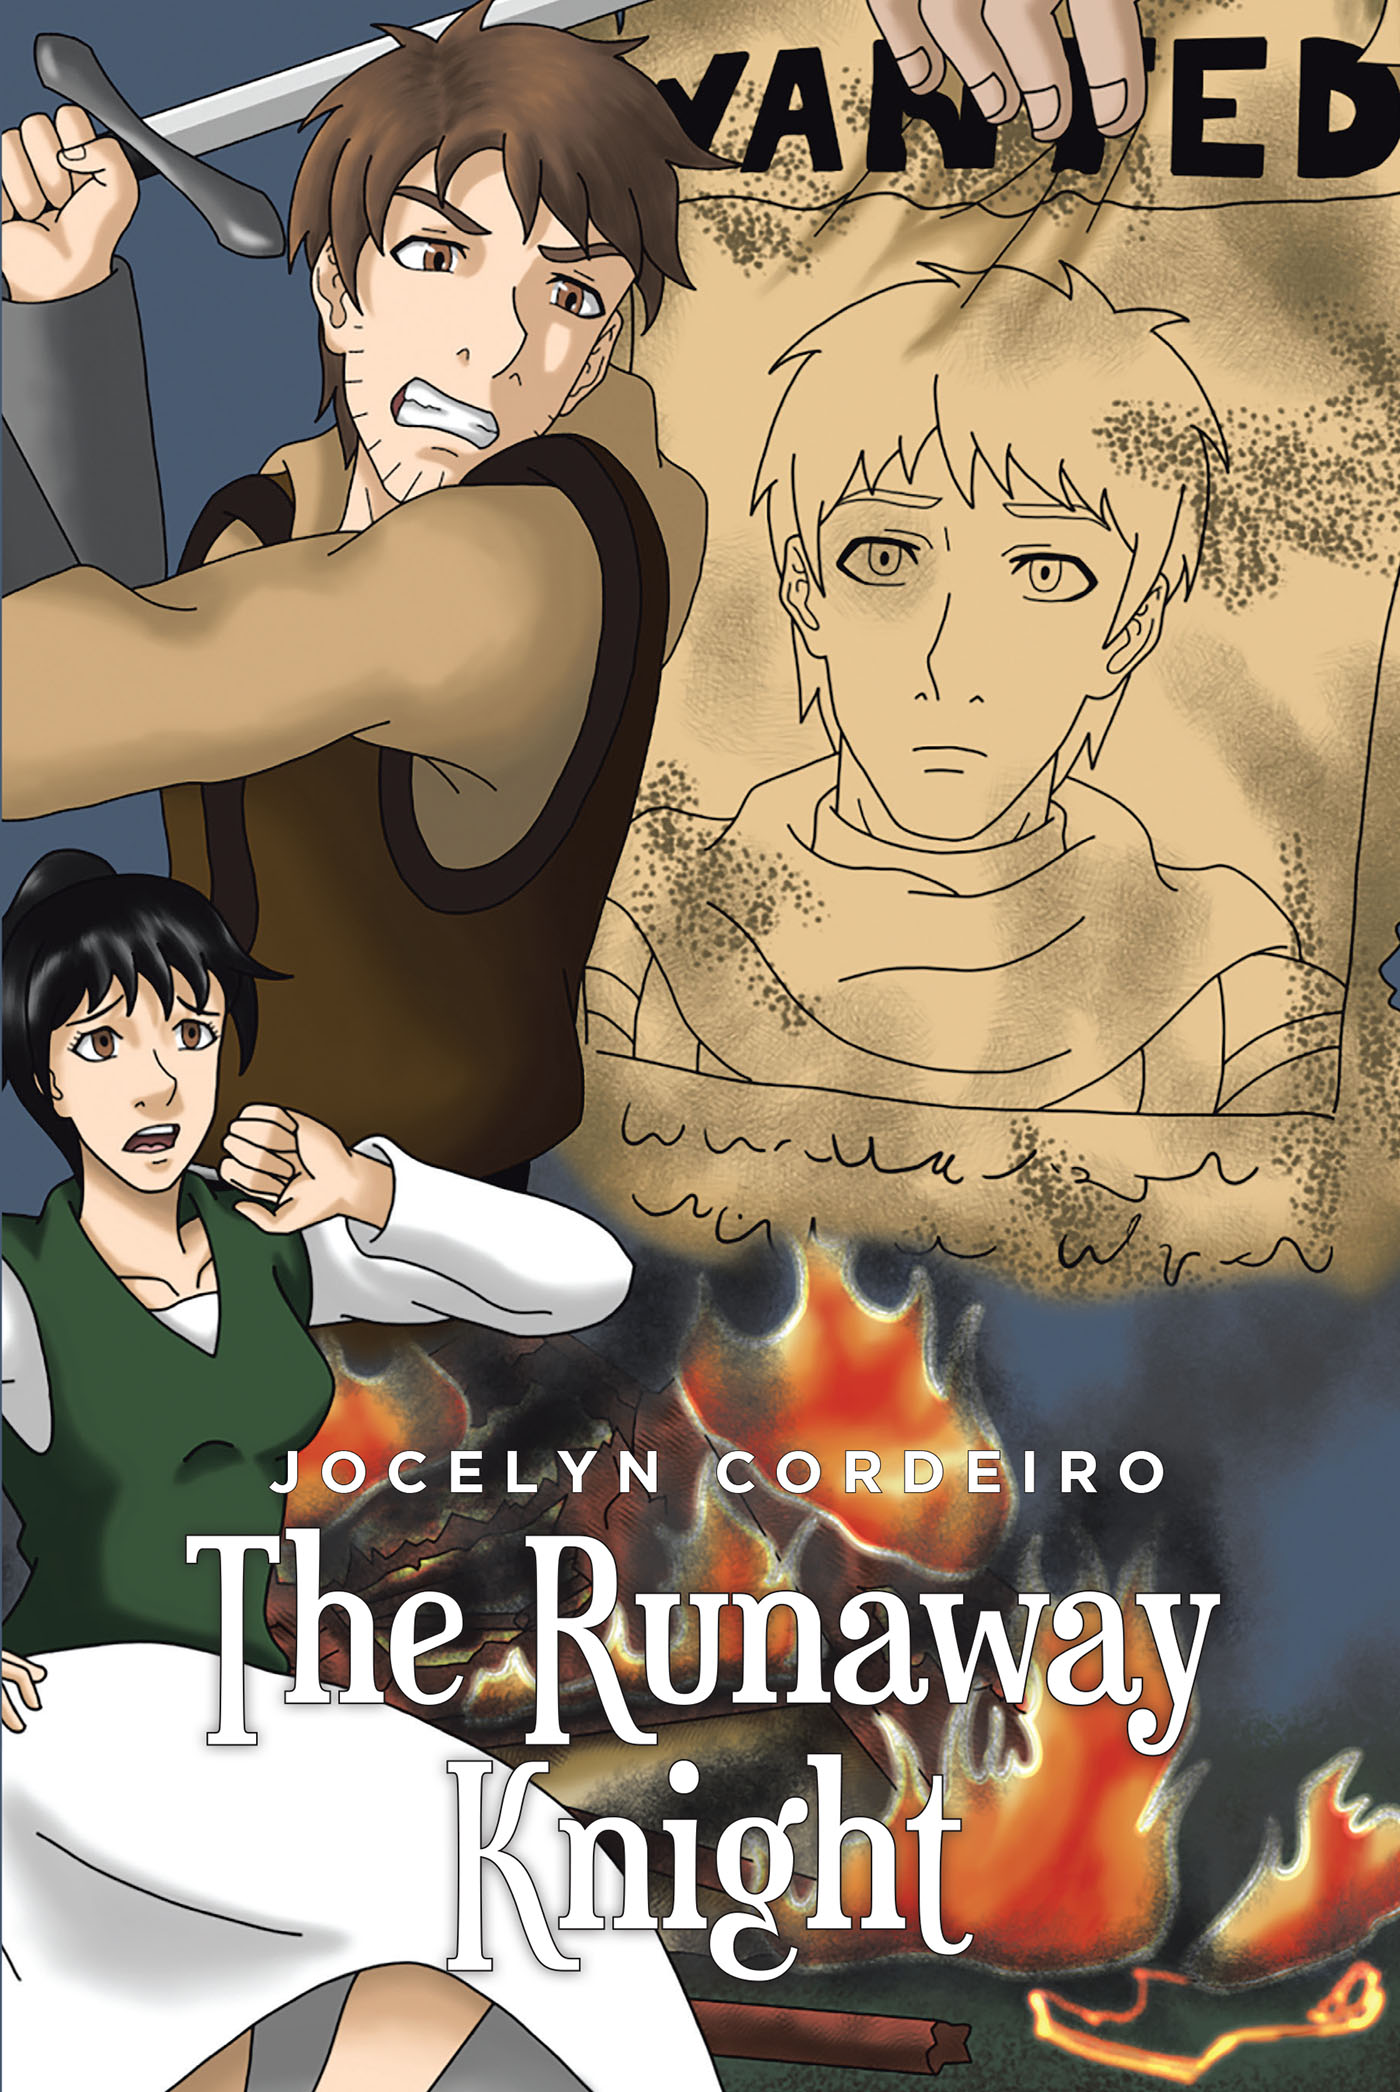 Jocelyn Cordeiro’s New Book, "The Runaway Knight," Follows the Adventures of a Former Knight Who Takes His Little Sister with Him to Run from the Law and His Own Past